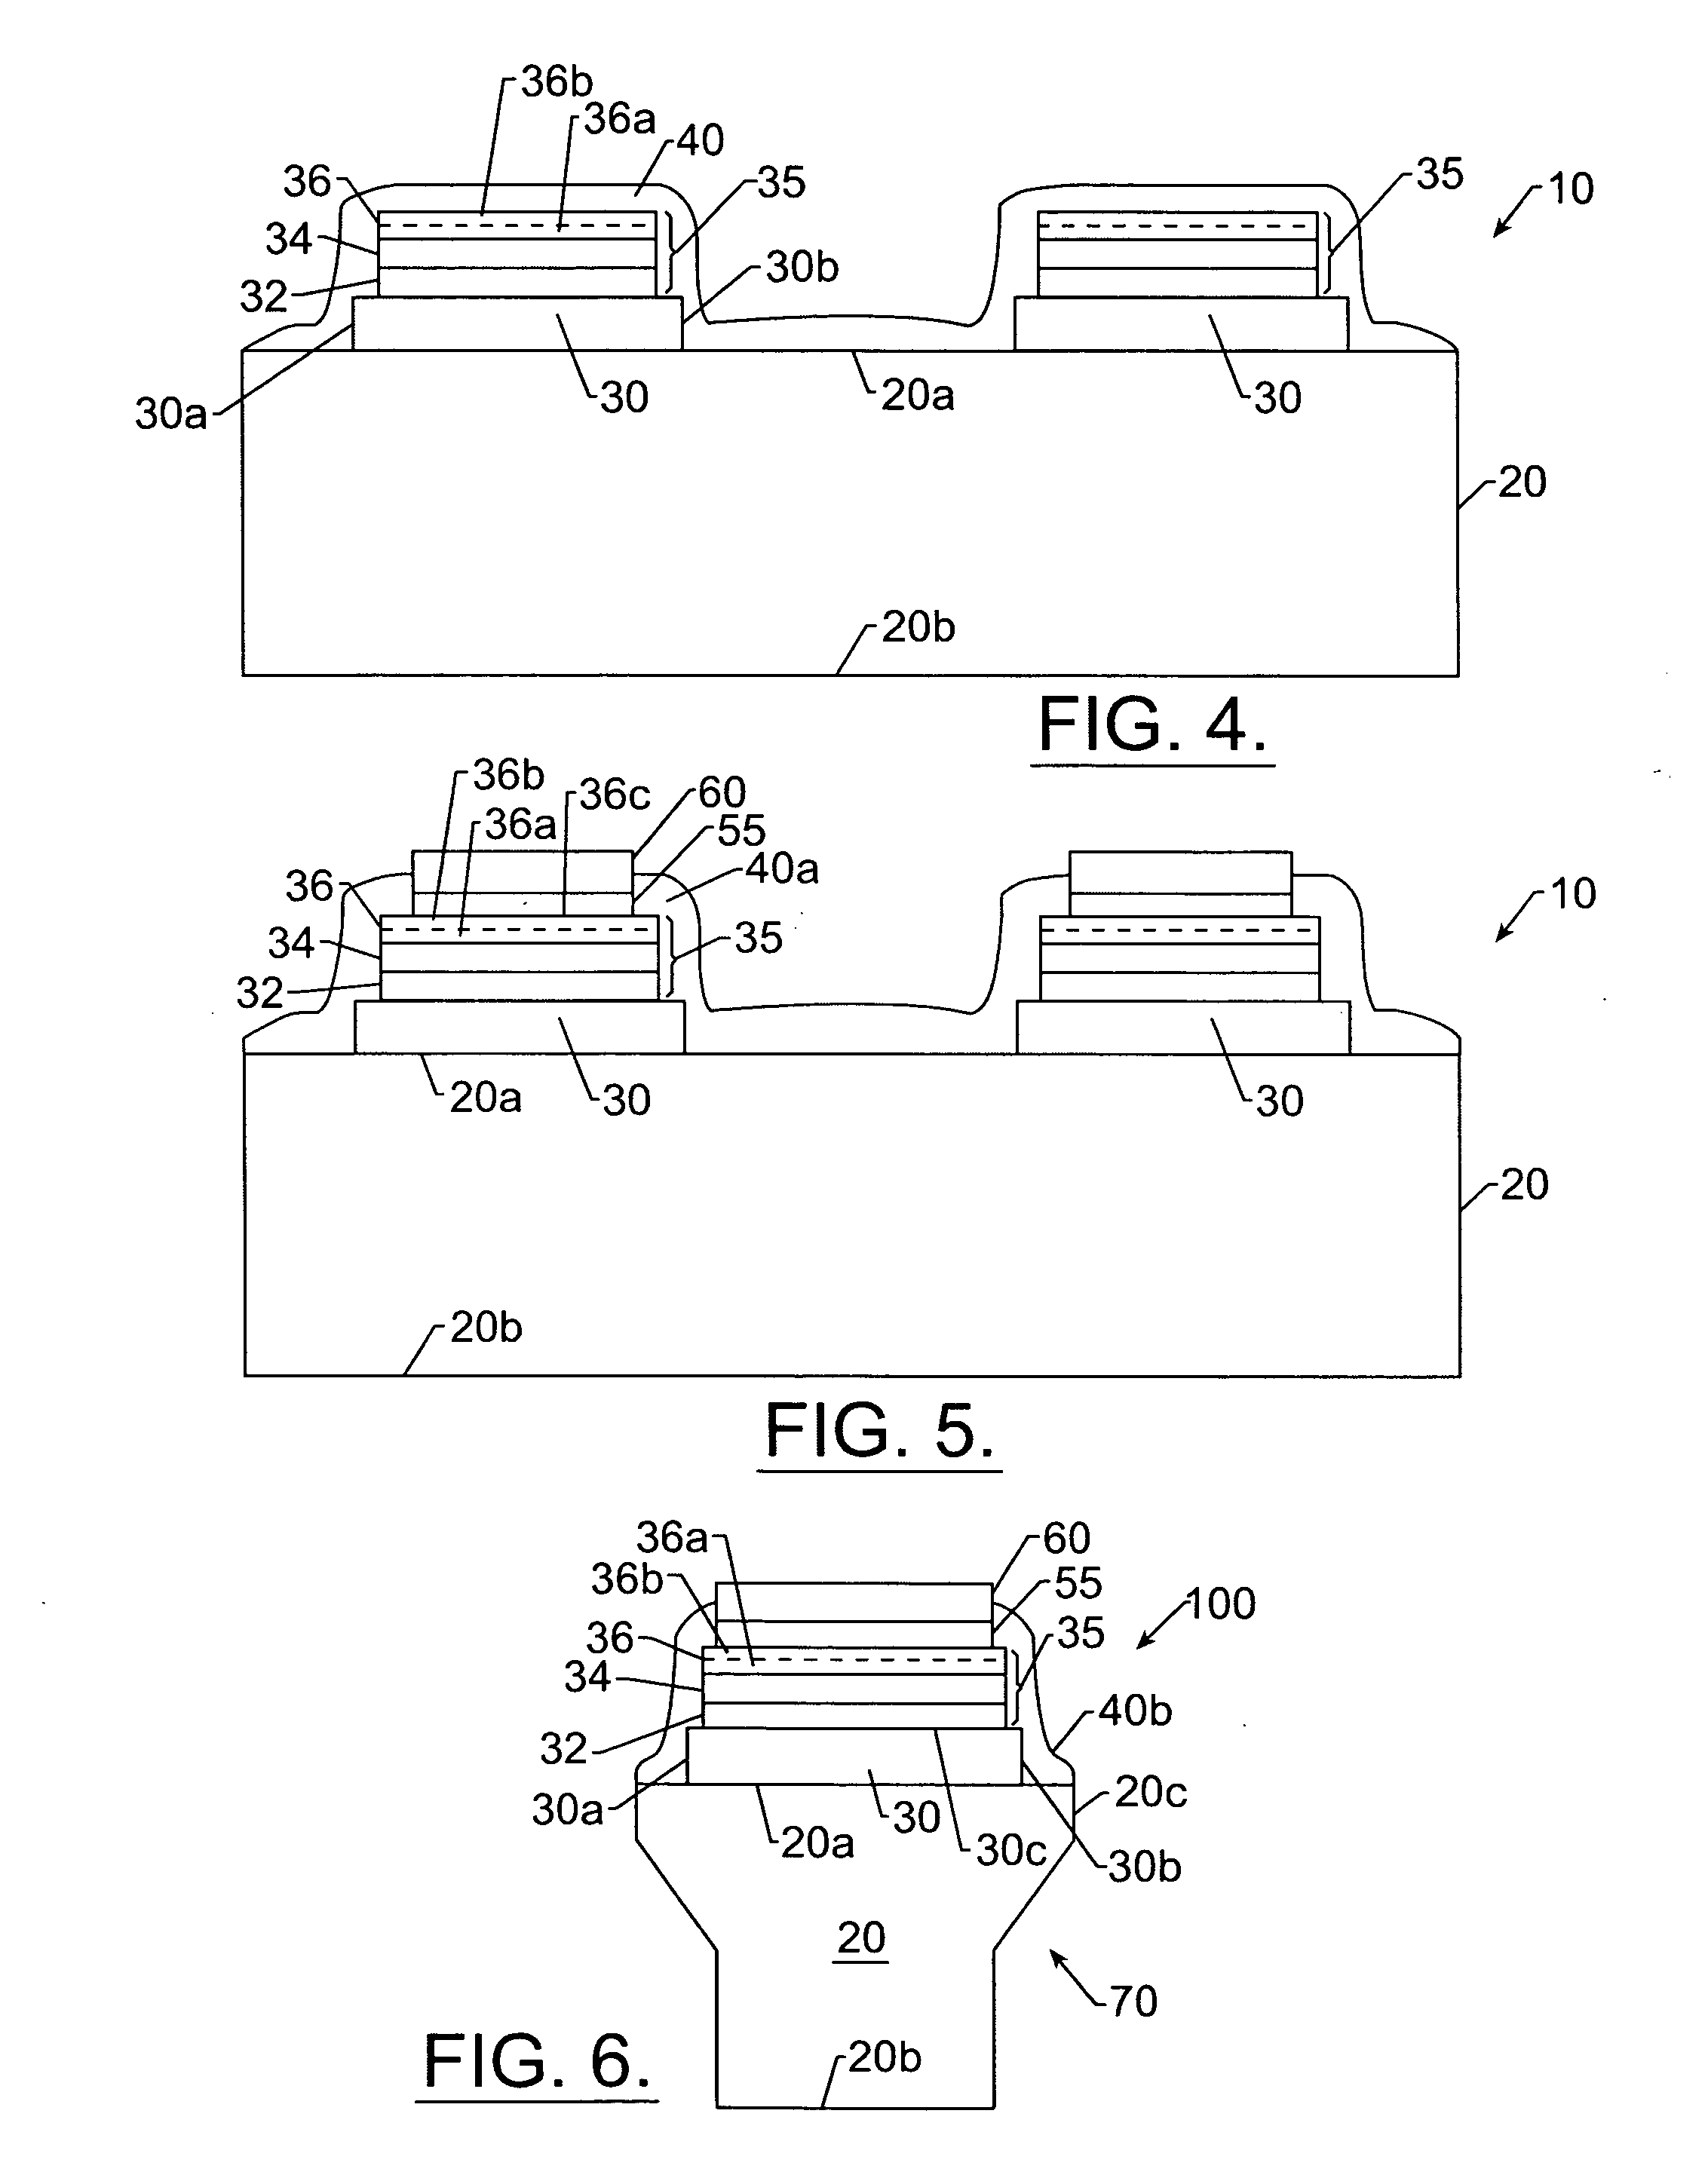 Methods of fabricating light emitting devices using mesa regions and passivation layers